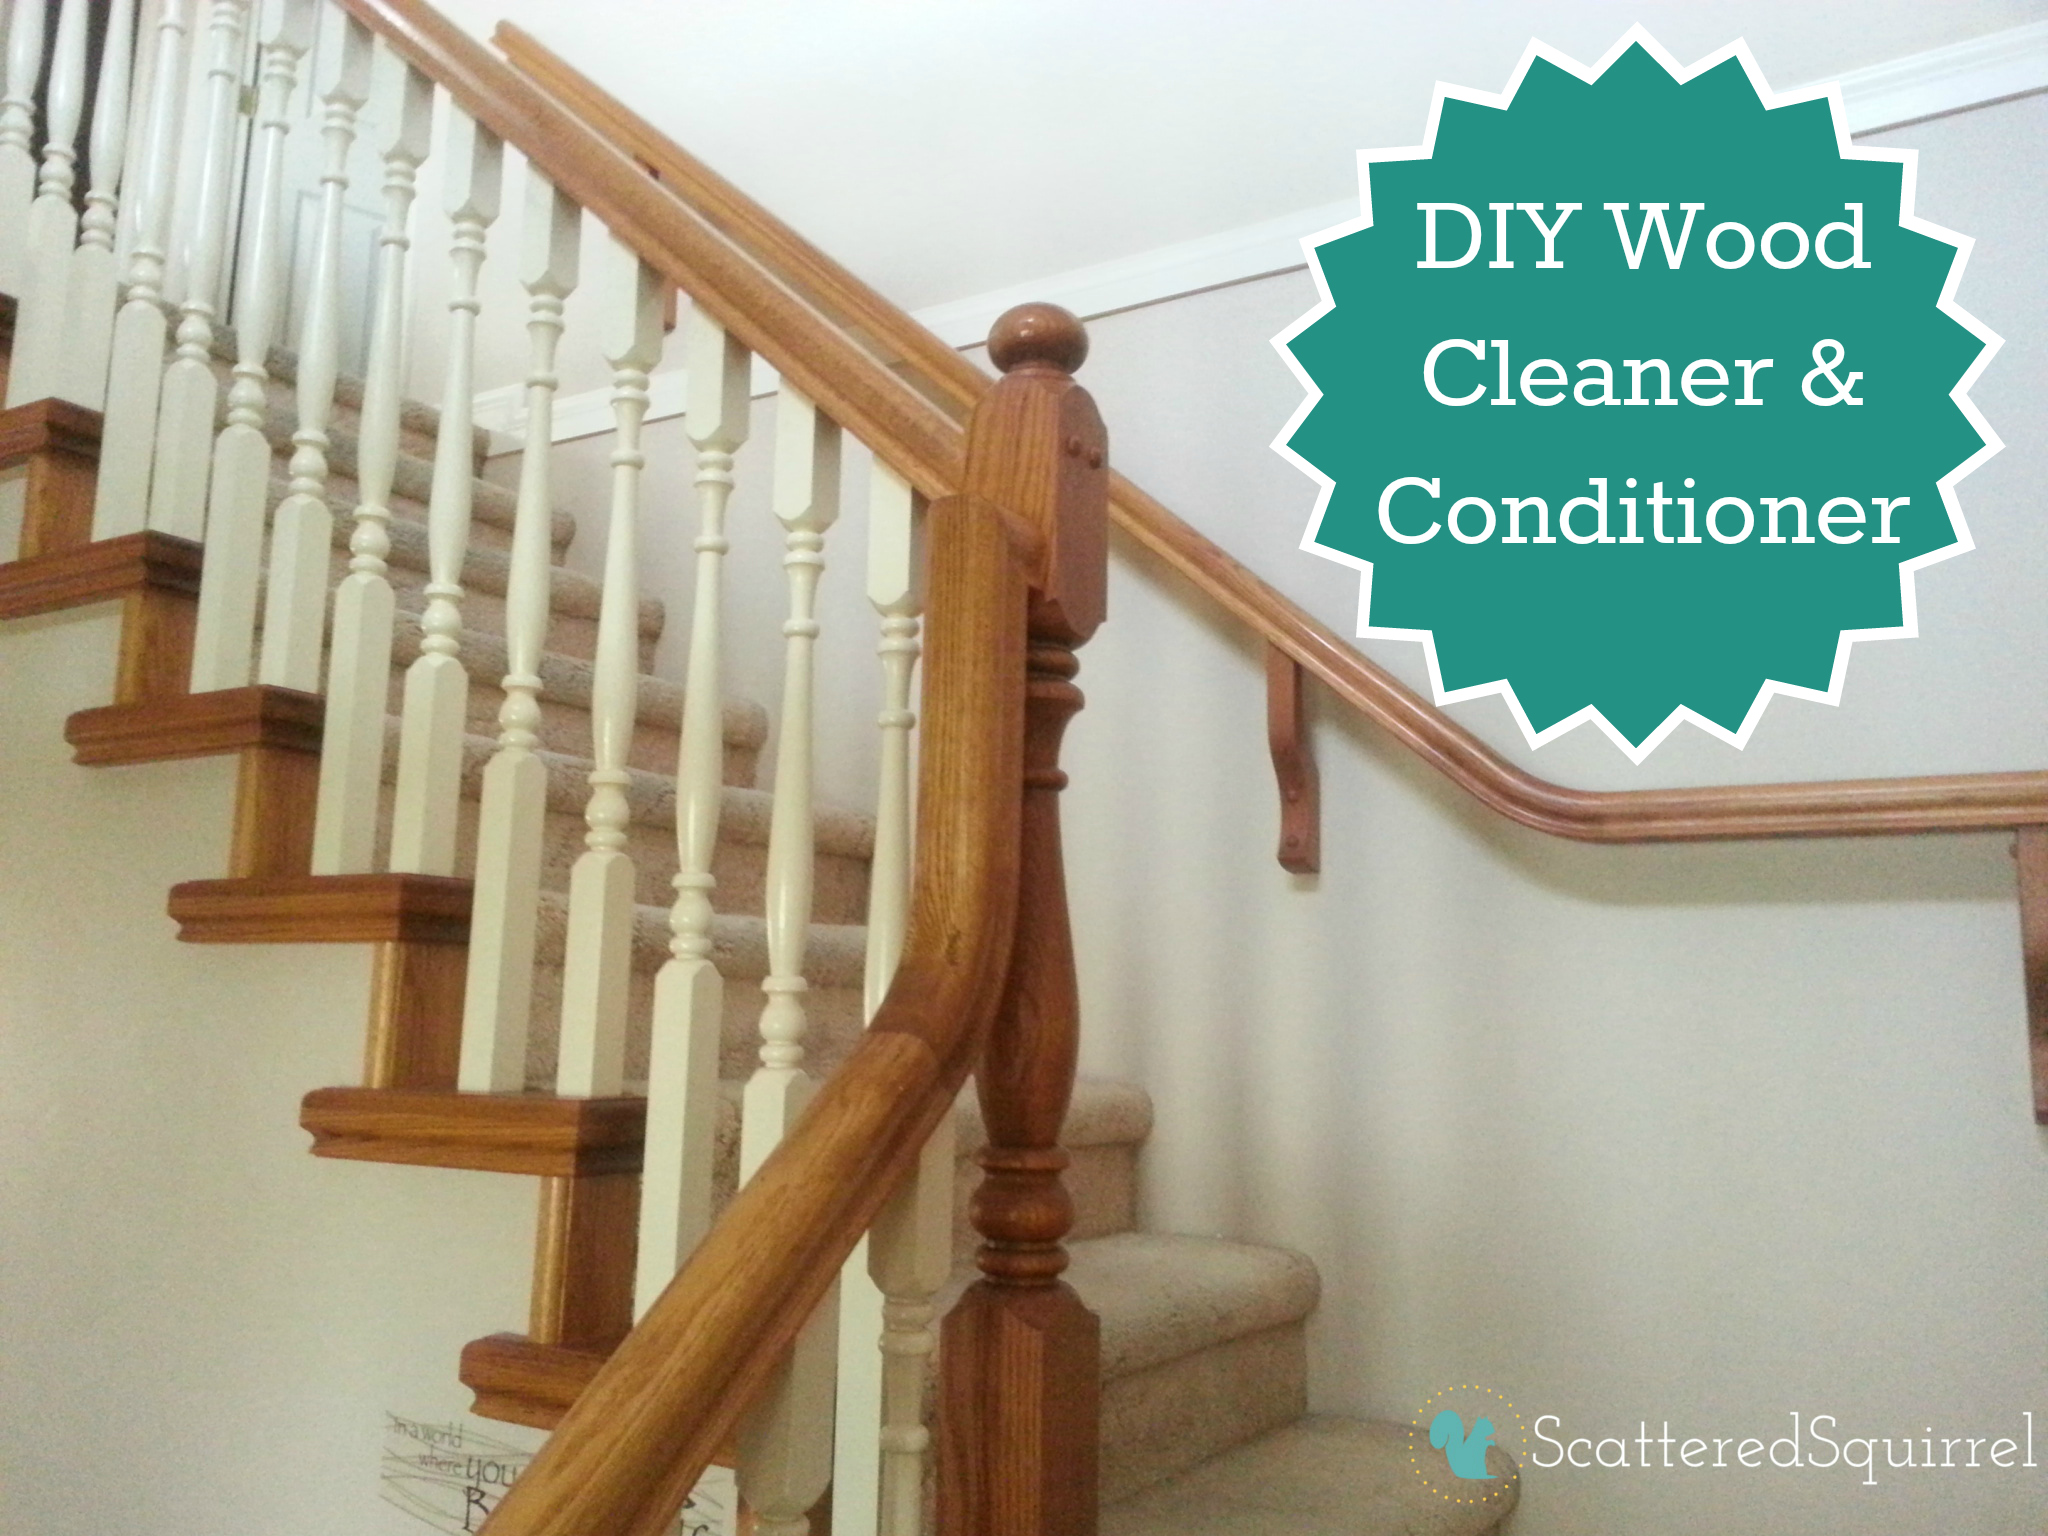 DIY Wood Cleaner and Conditioner